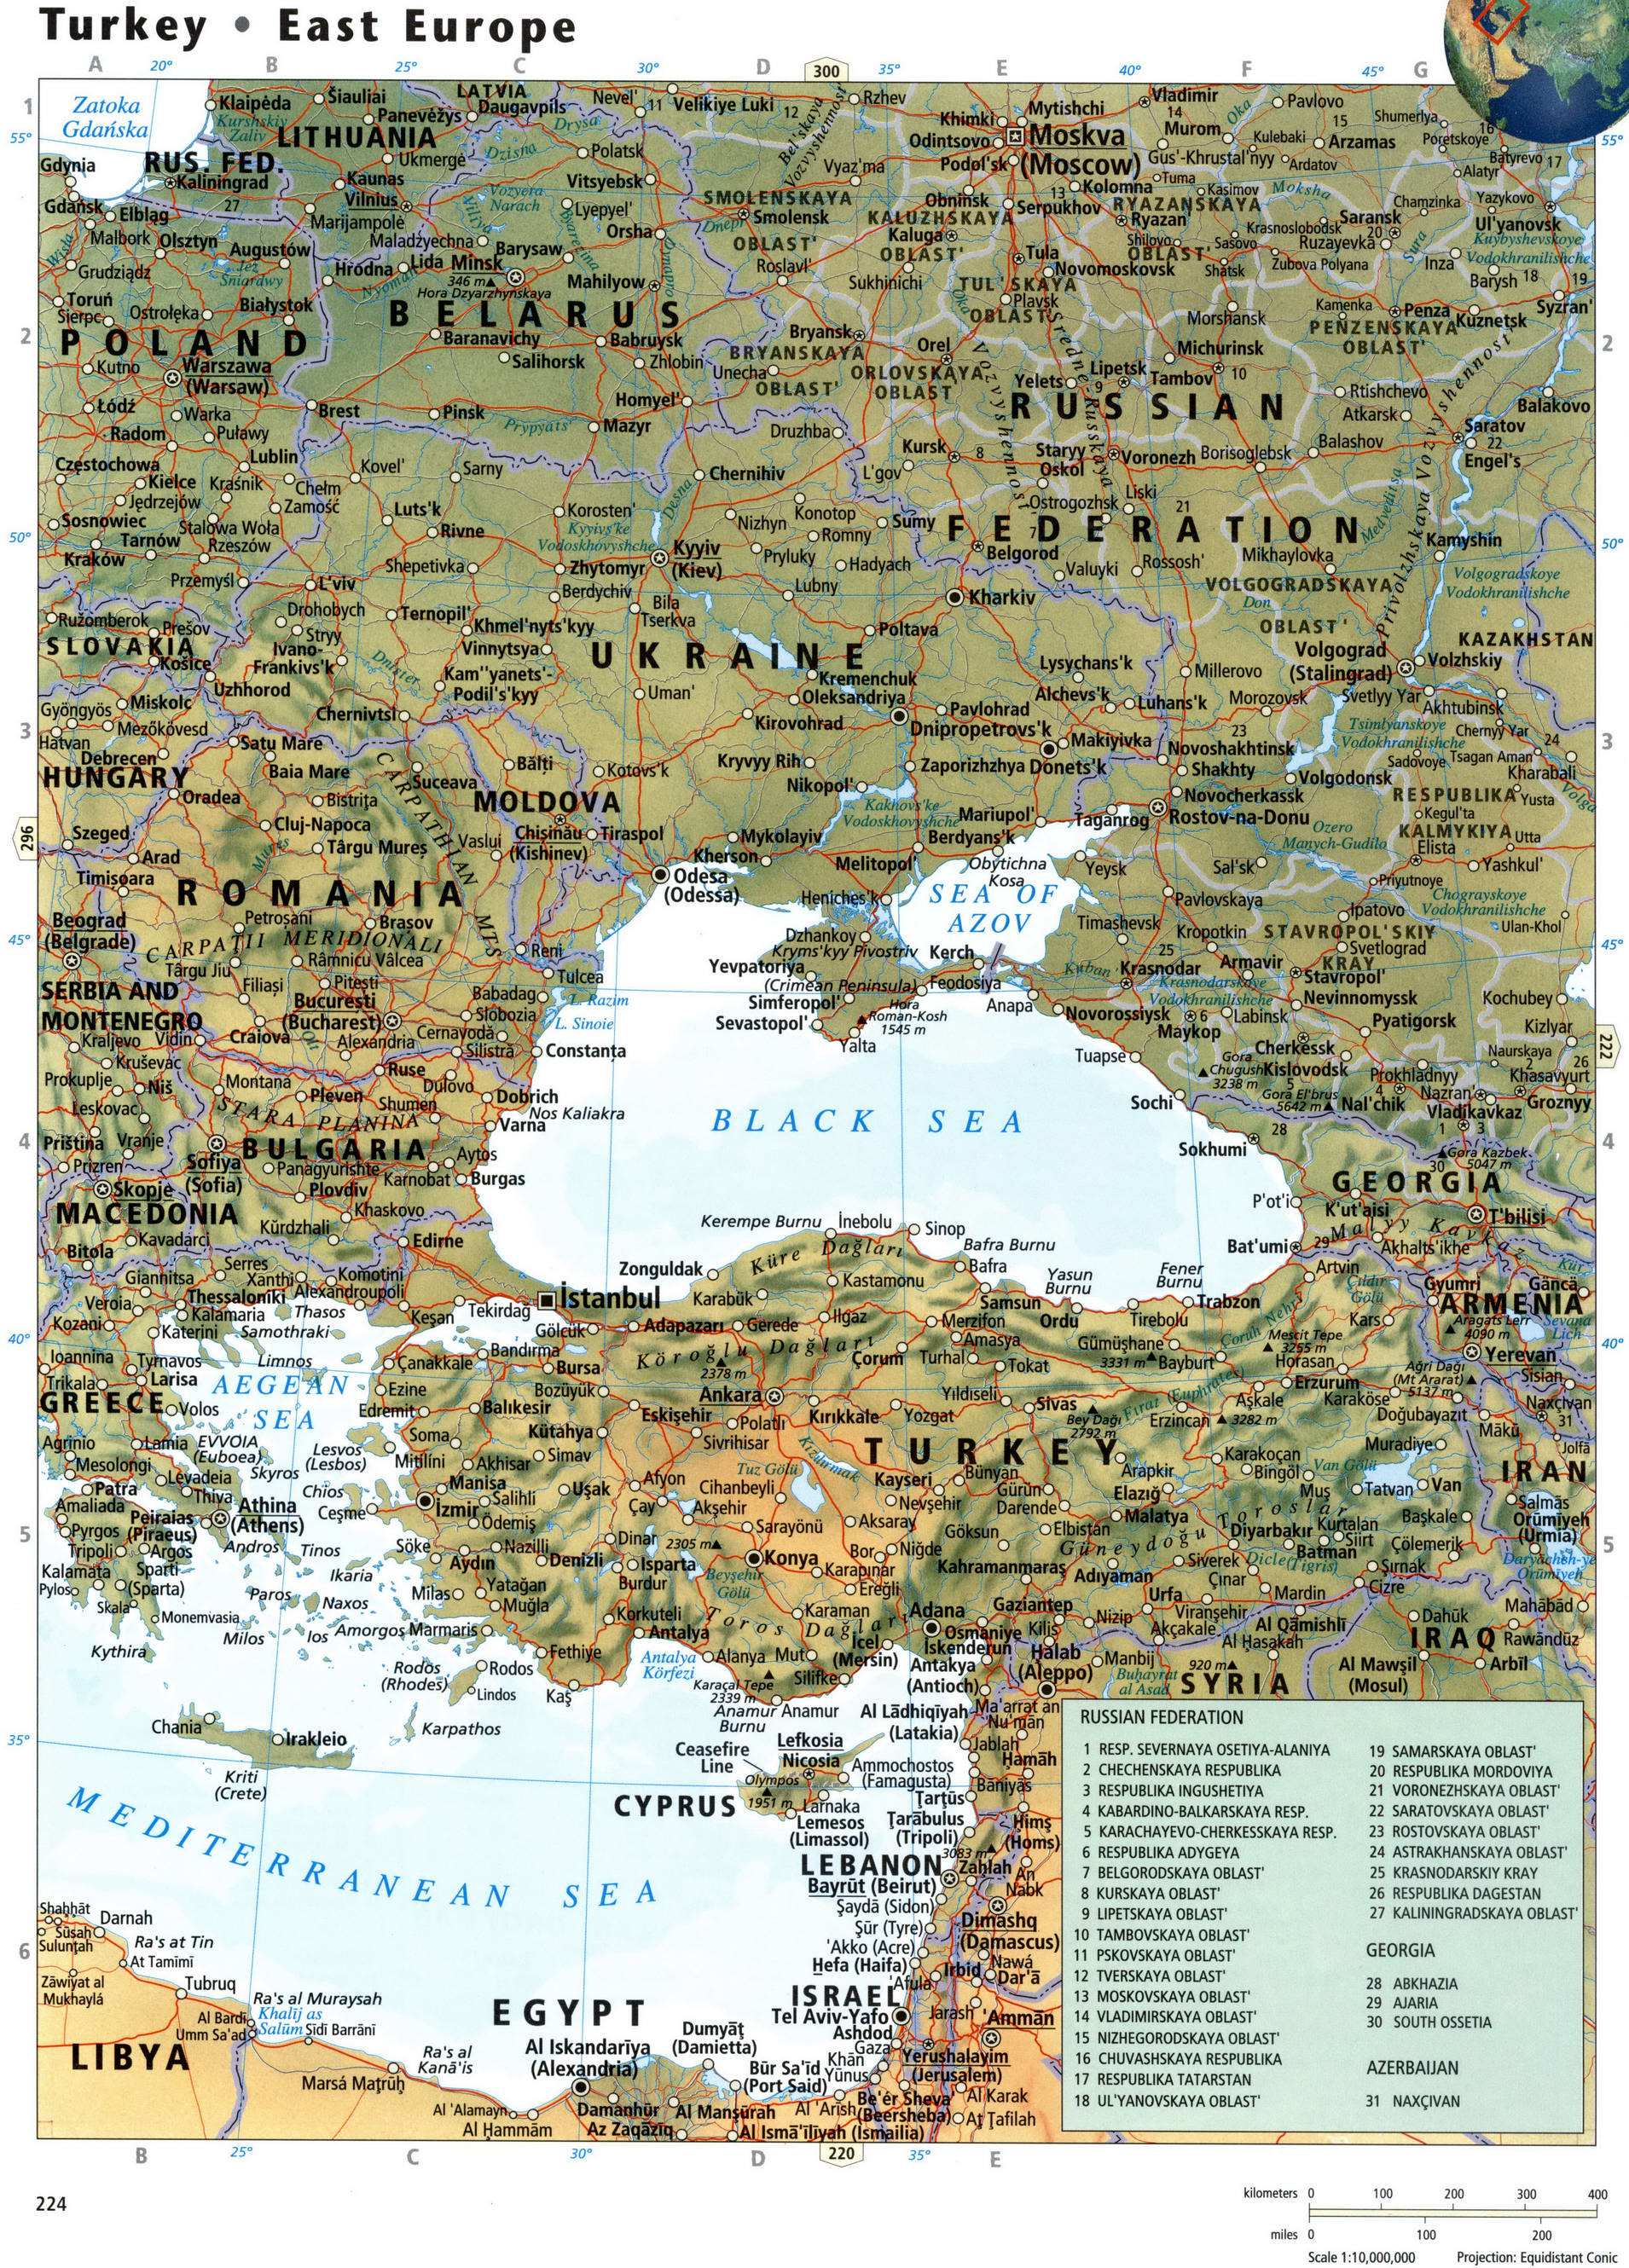 East Europe and Turkey map